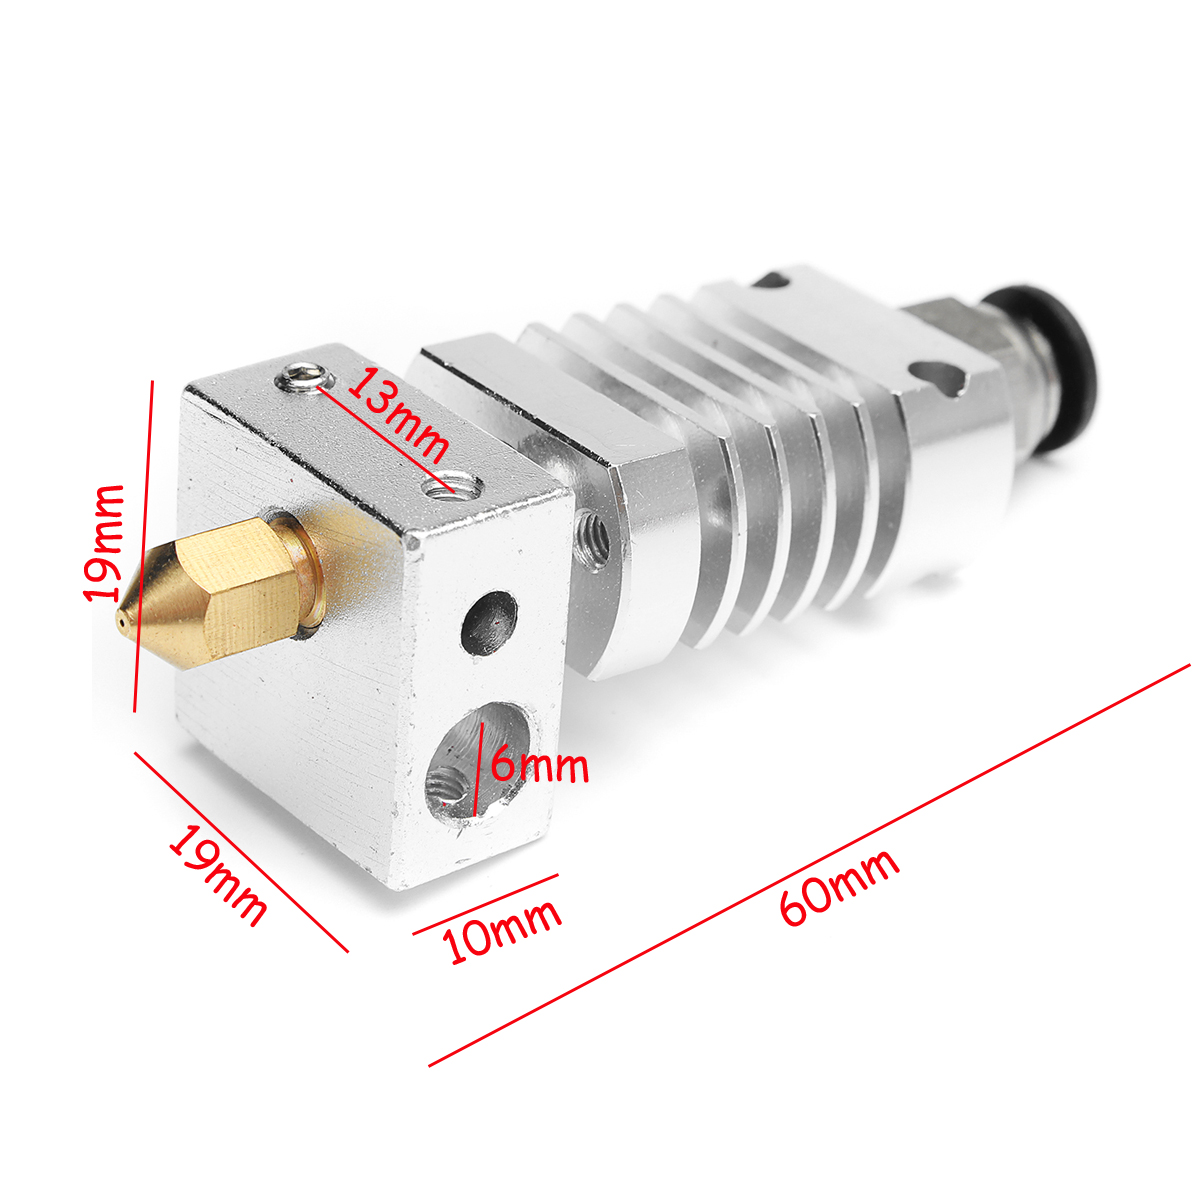 V6 1.75mm All Metal J-Head Hotend Remote Extruder Kit with Heating tube for CR10 3D Printer 19